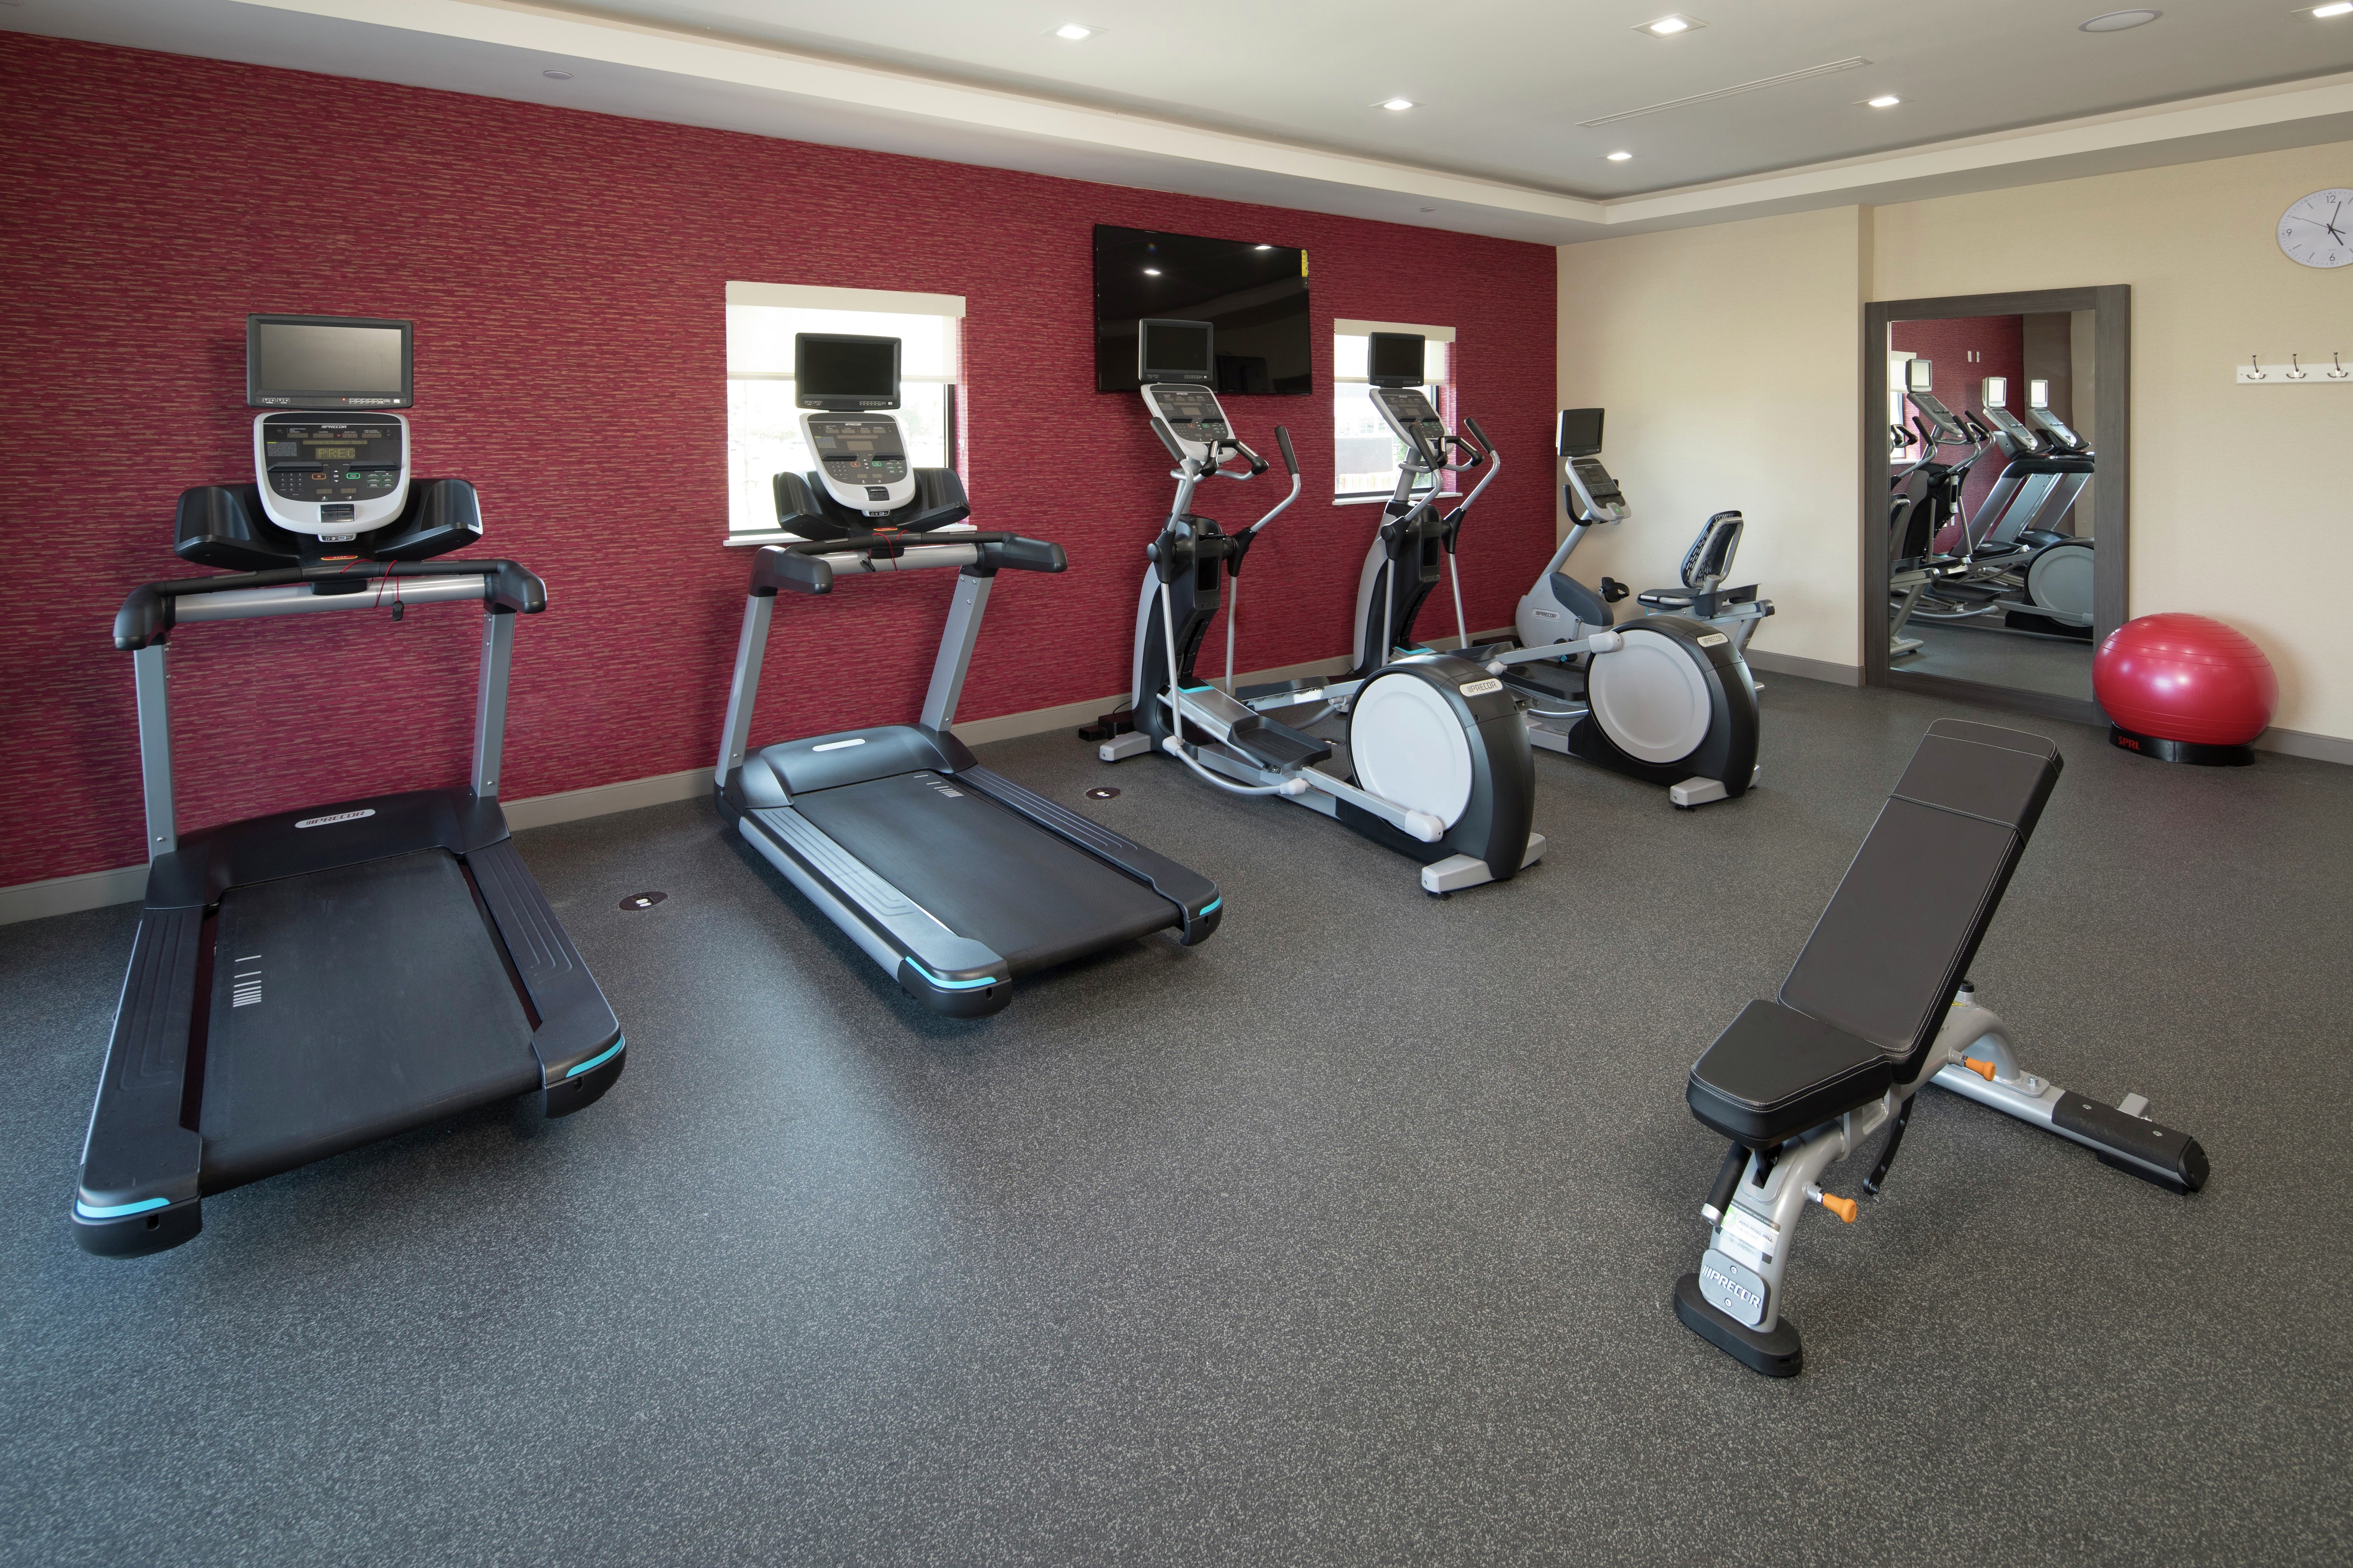 Fitness Center with Treadmills, Cross-Trainer, Cycle Machine and Weight Bench